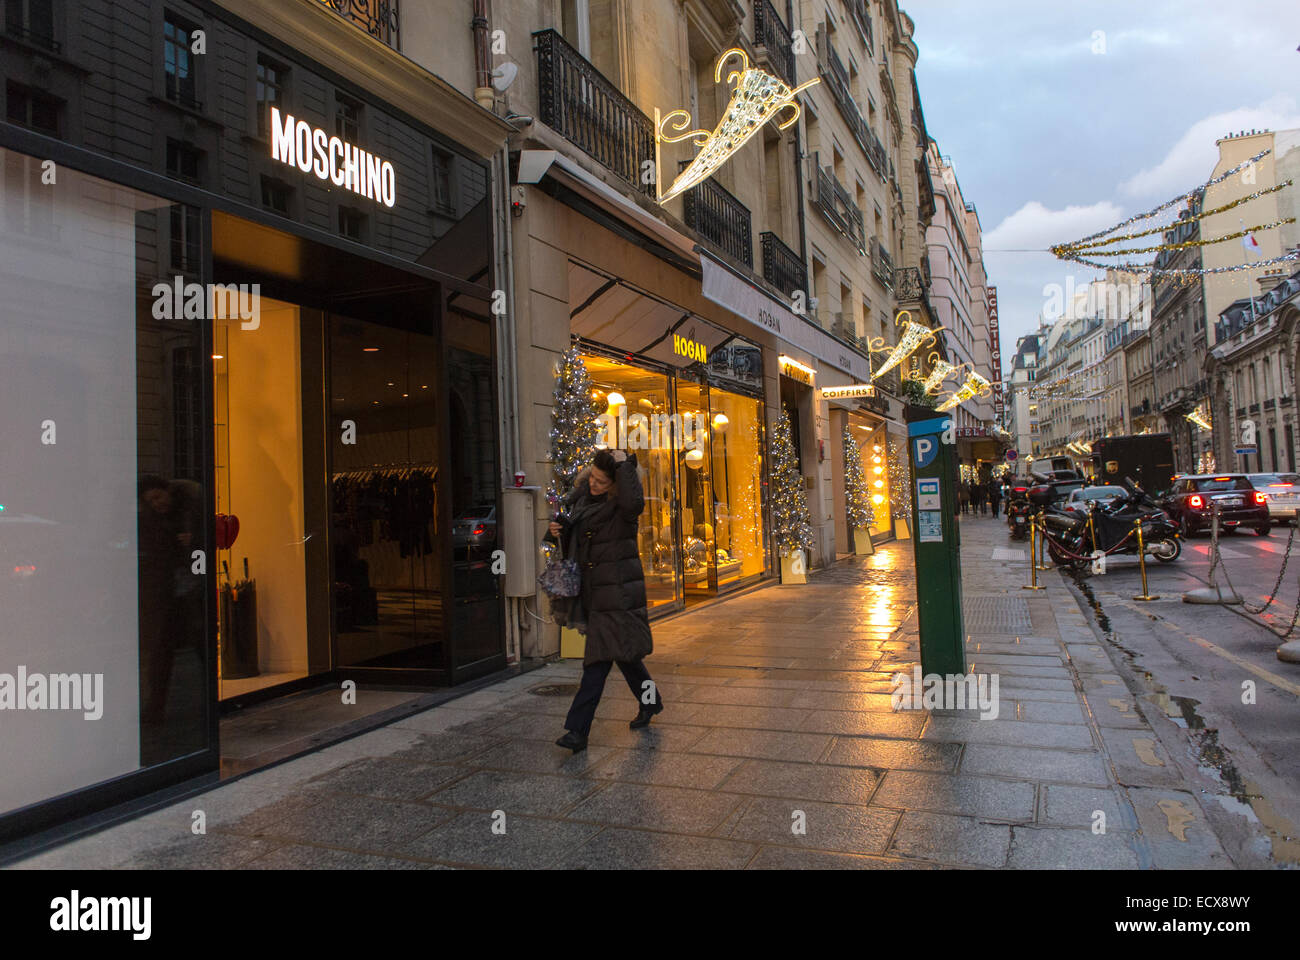 Paris, France, People luxury window Shopping, Outside Street Scenes,  Moschino, (Rue Faubourg Saint Honoré) row shops fronts, WINTER SCENE Stock  Photo - Alamy